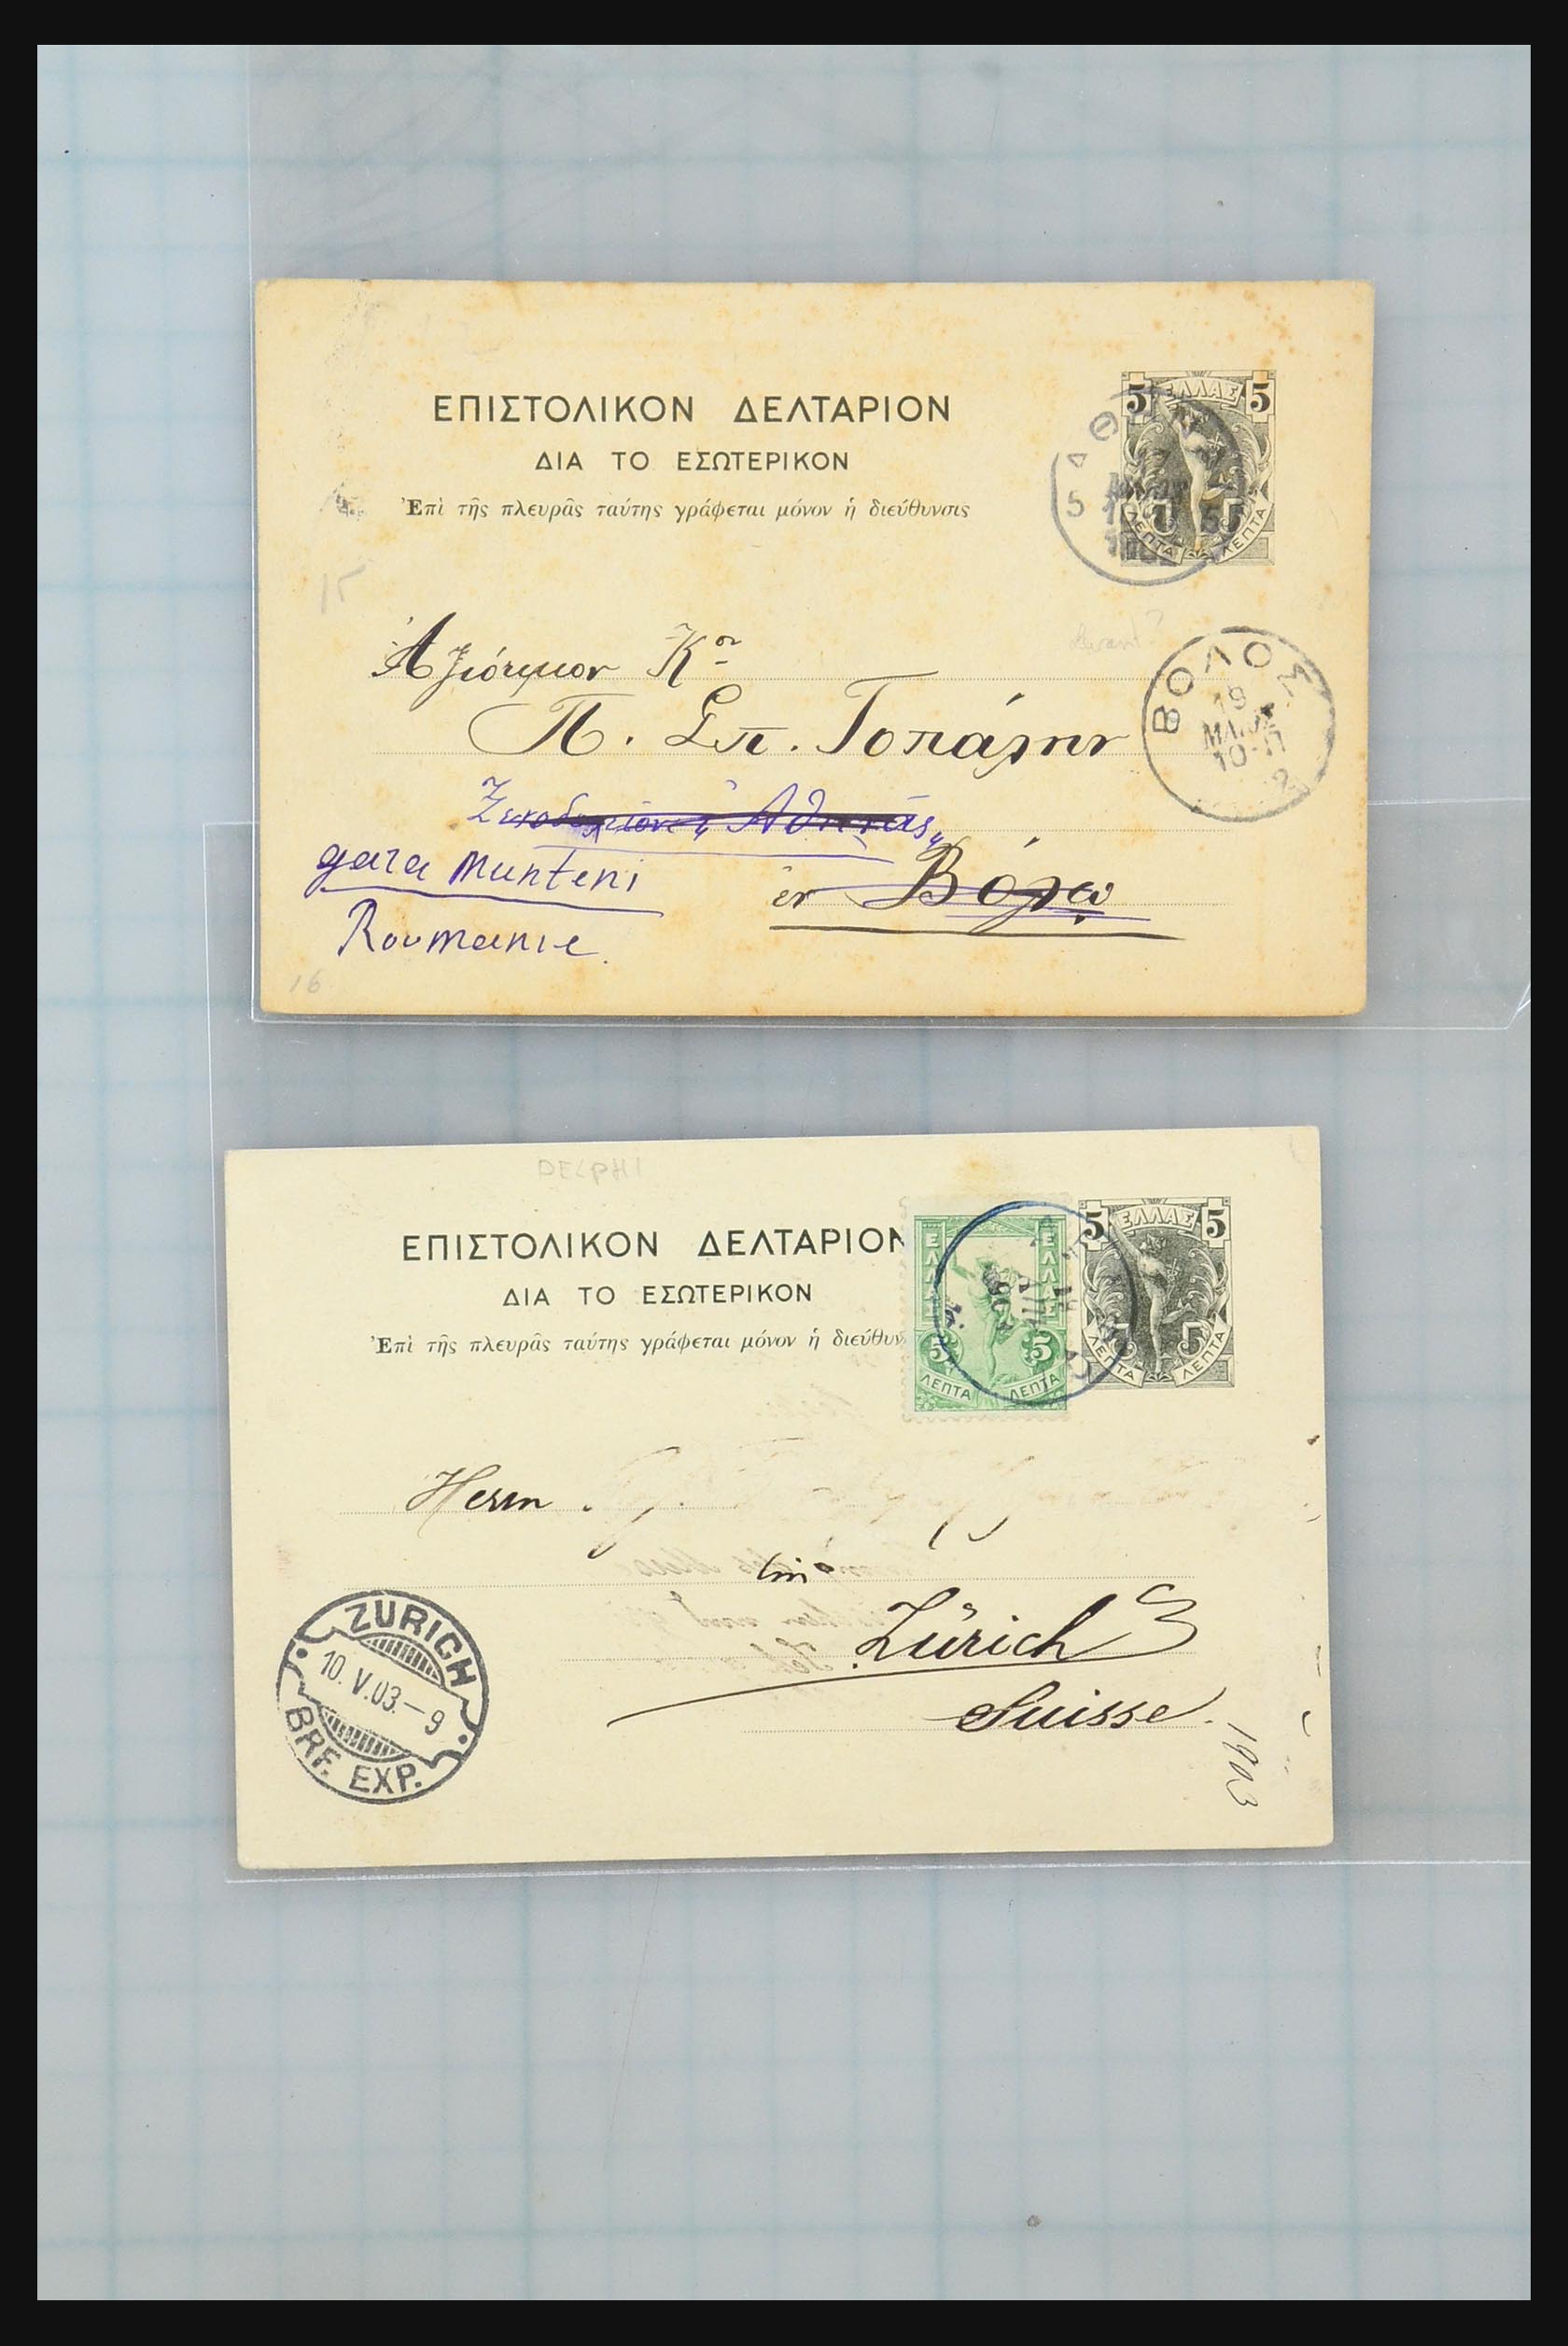 31358 029 - 31358 Portugal/Luxemburg/Greece covers 1880-1960.